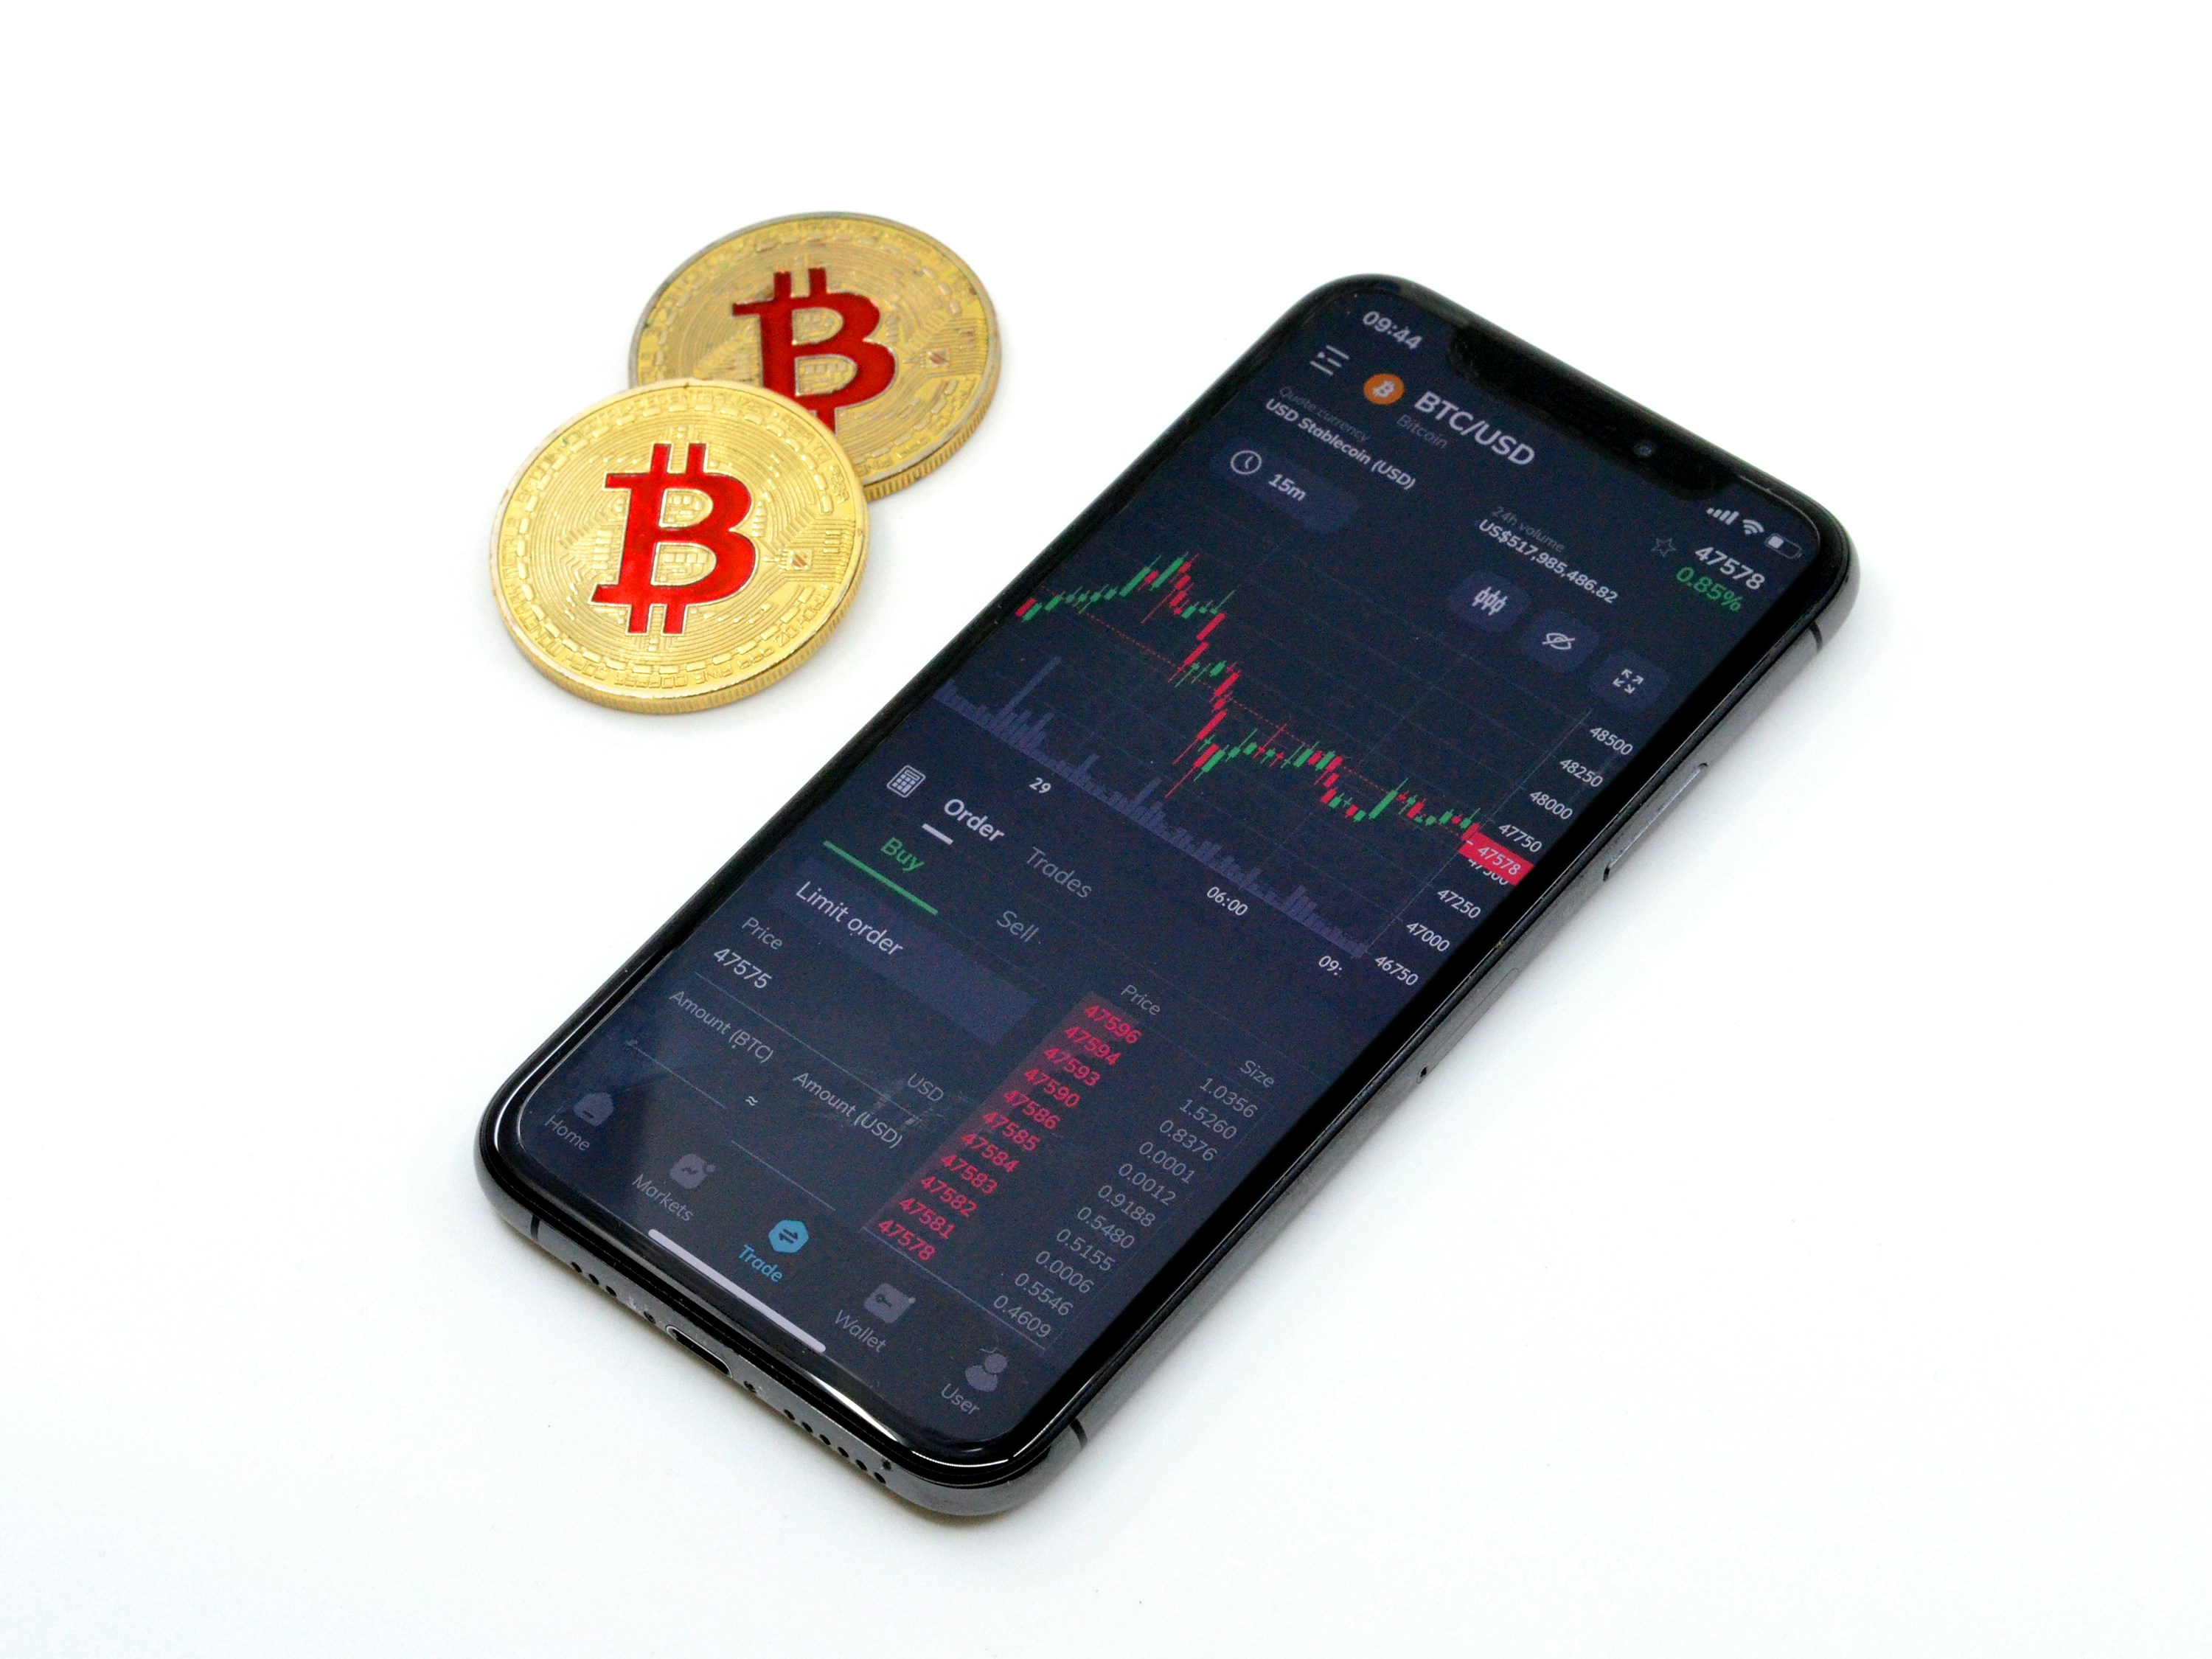 Bitcoin physical coins next to a an Iphone with Trading app on the screen